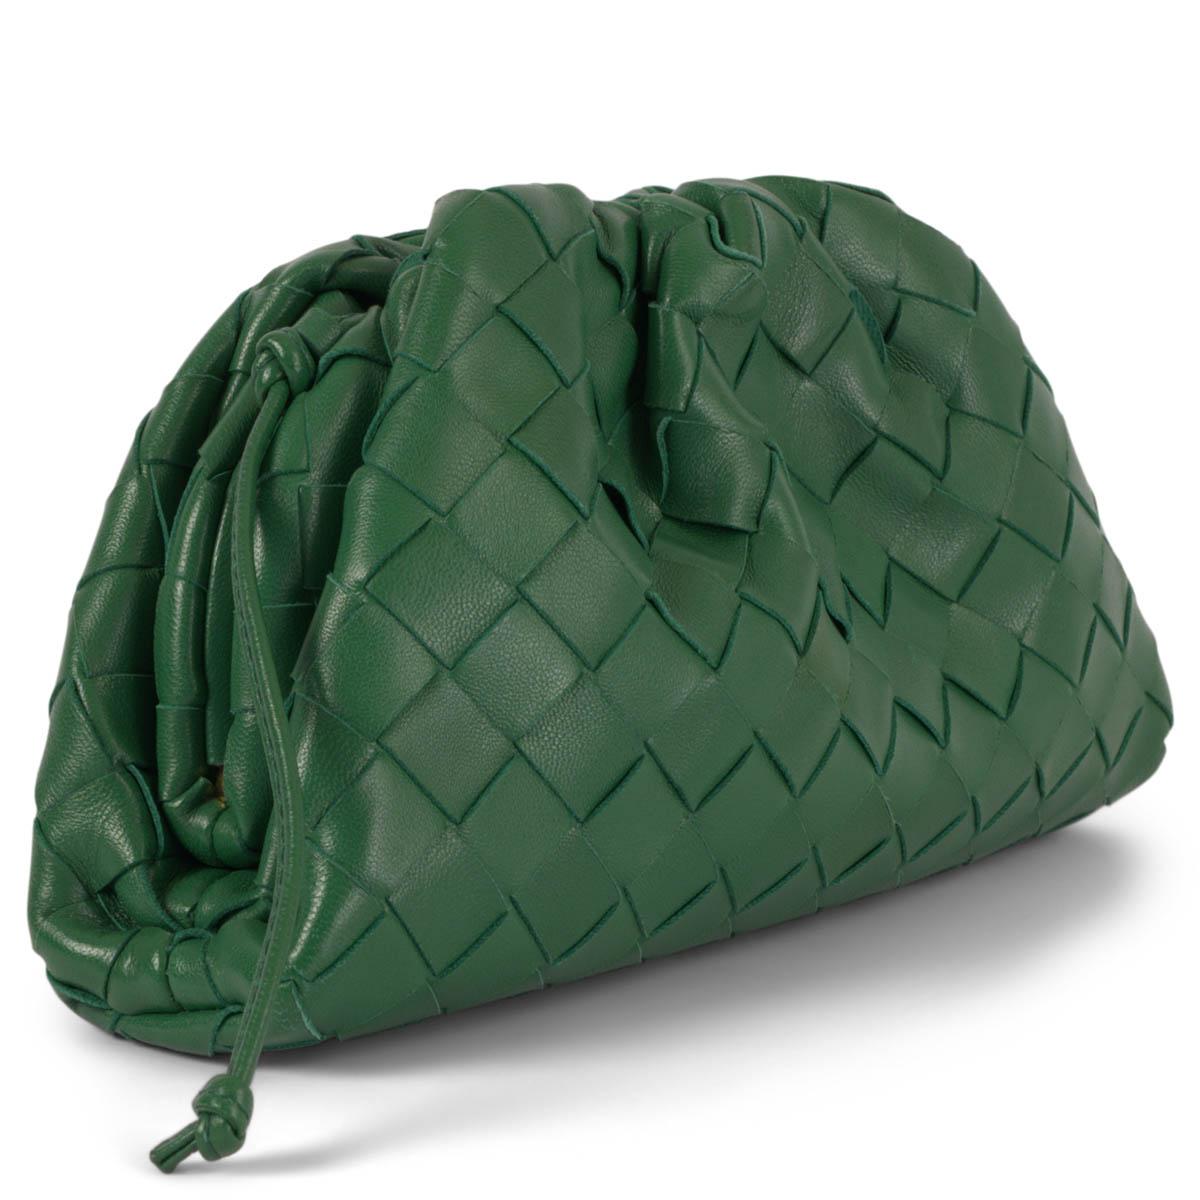 100% authentic Bottega Veneta Mini Pouch in Racing green Intrecciato leather. Opens with a magnetic frame closure and has a single compartment lined in calfskin. Has been carried and is in excellent condition. Comes with dust